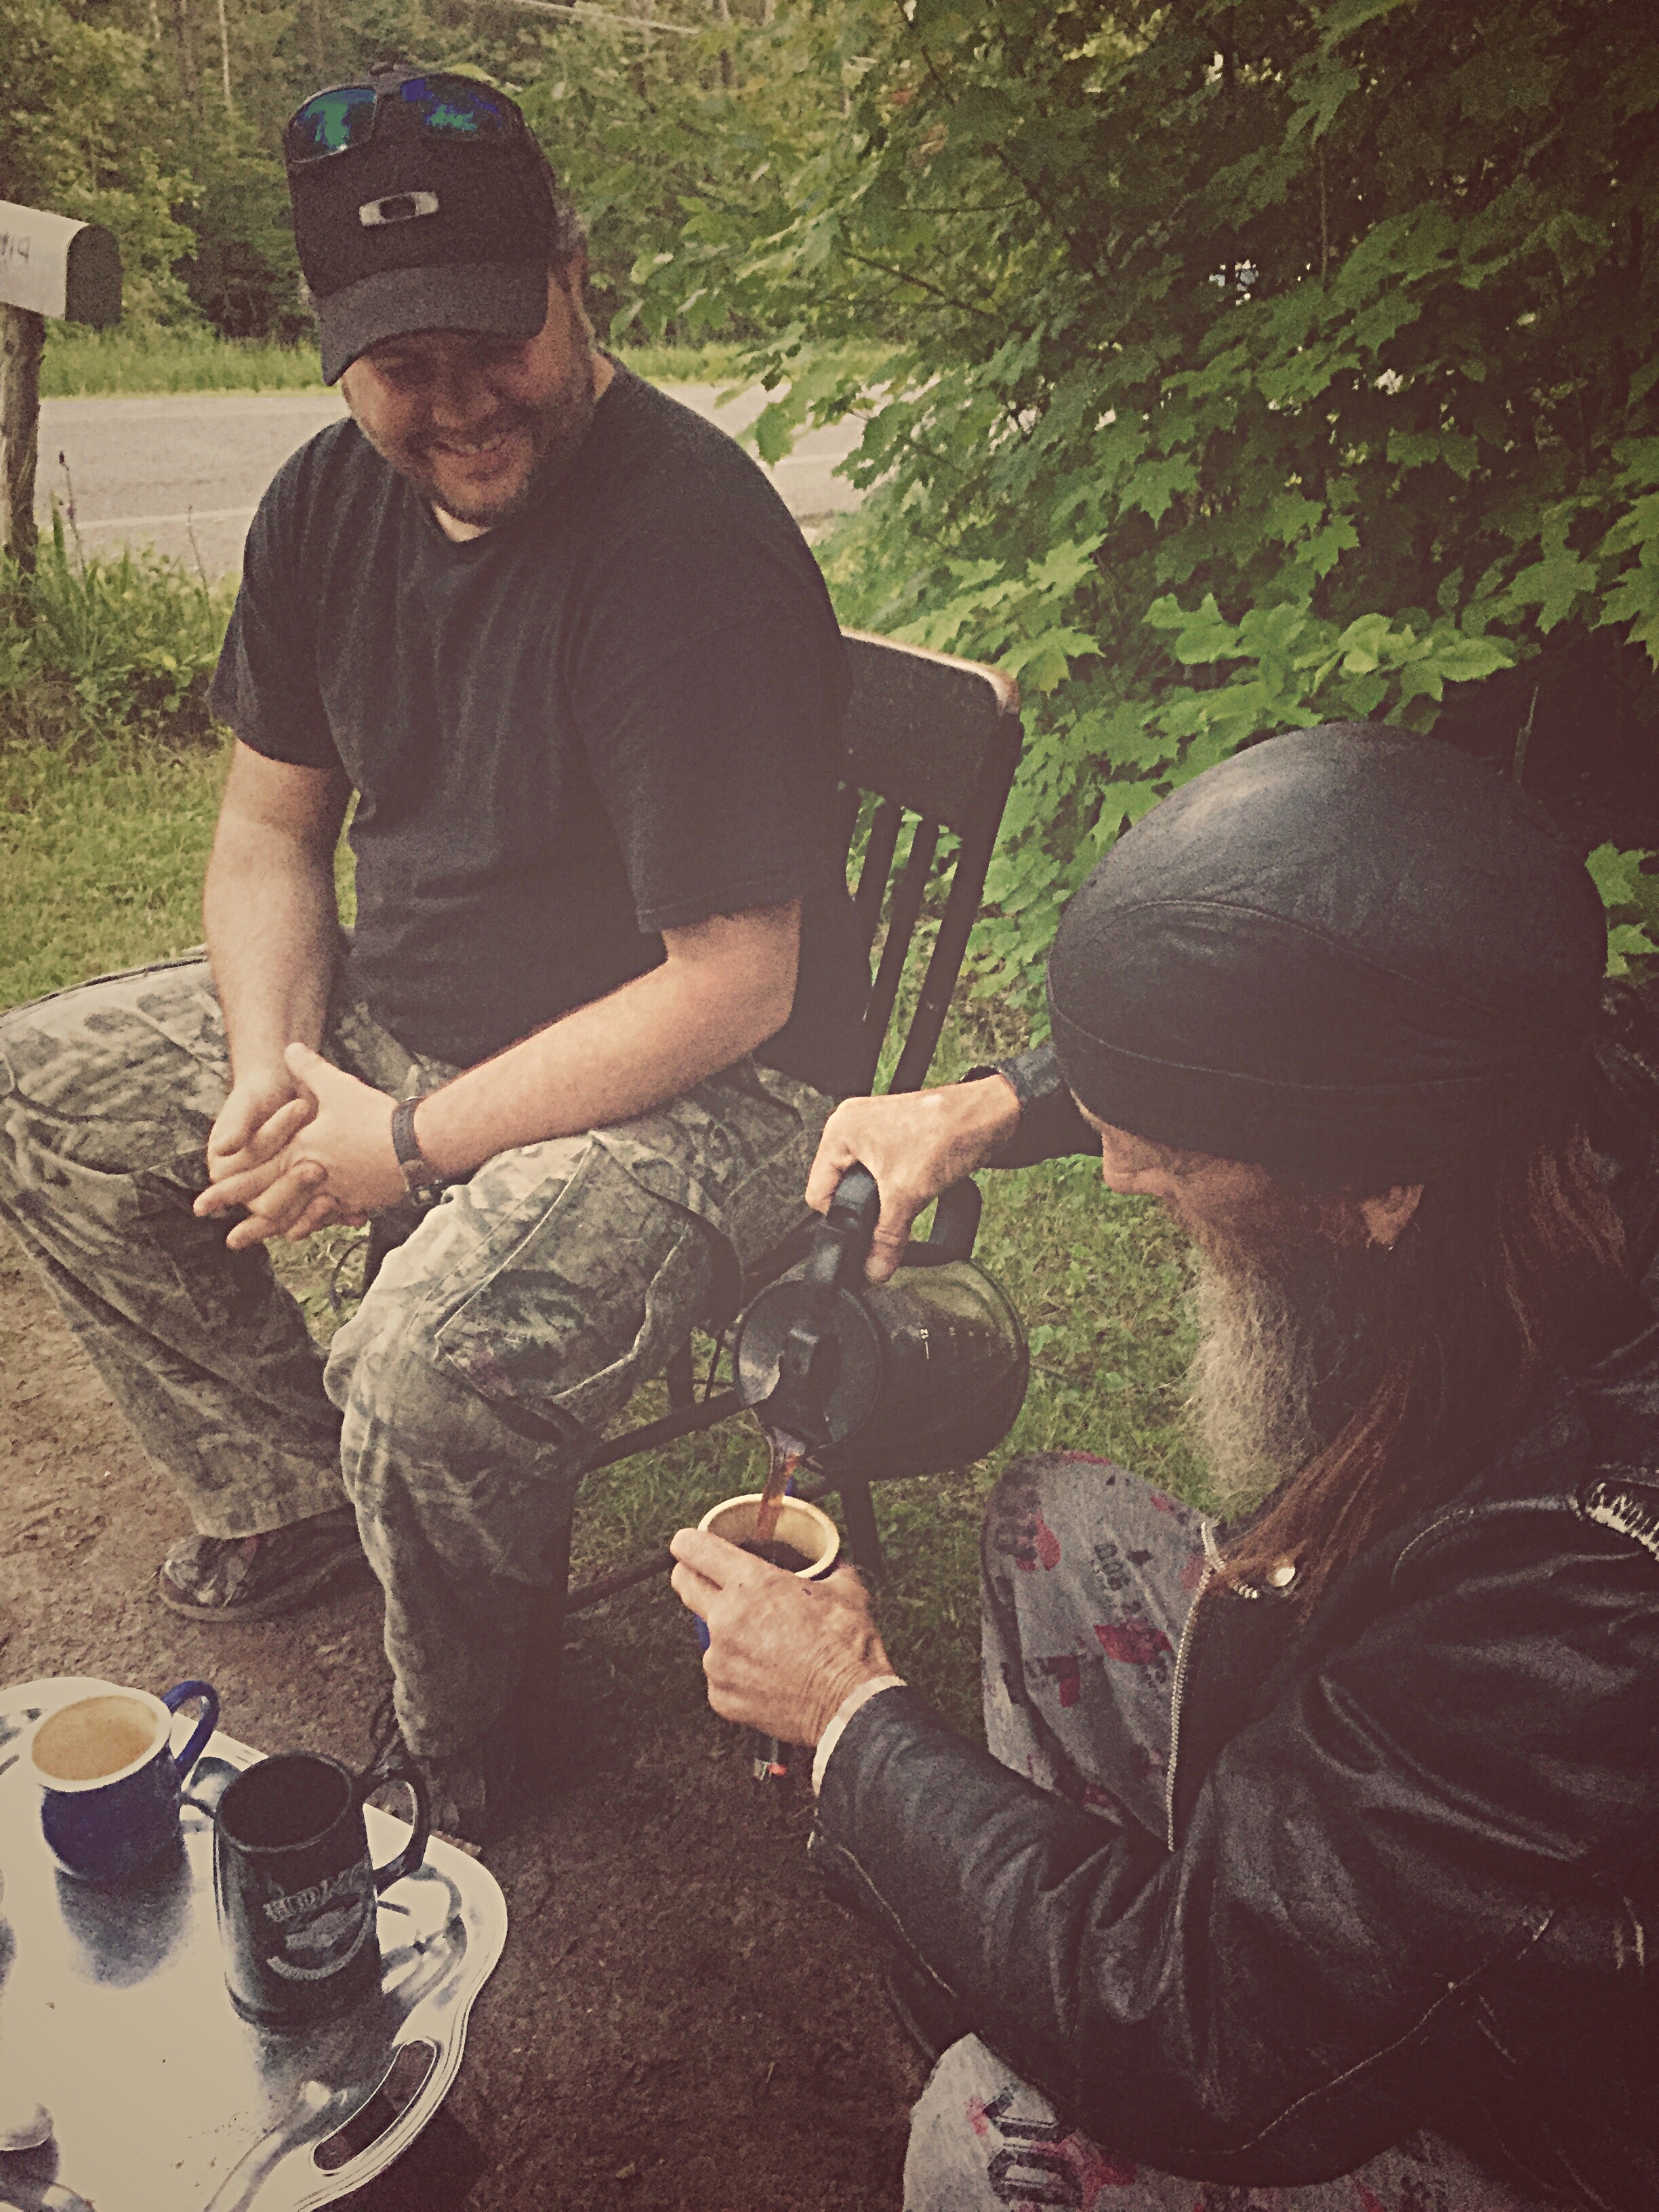  Michael McCaffrey joins "Slim" for a cup of coffee on the side of Fayetteville Road in Malone, N.Y. as state troopers descend on the area in search of David Sweat.  (Chelsia Rose Marcius/June 26, 2015)&nbsp;  